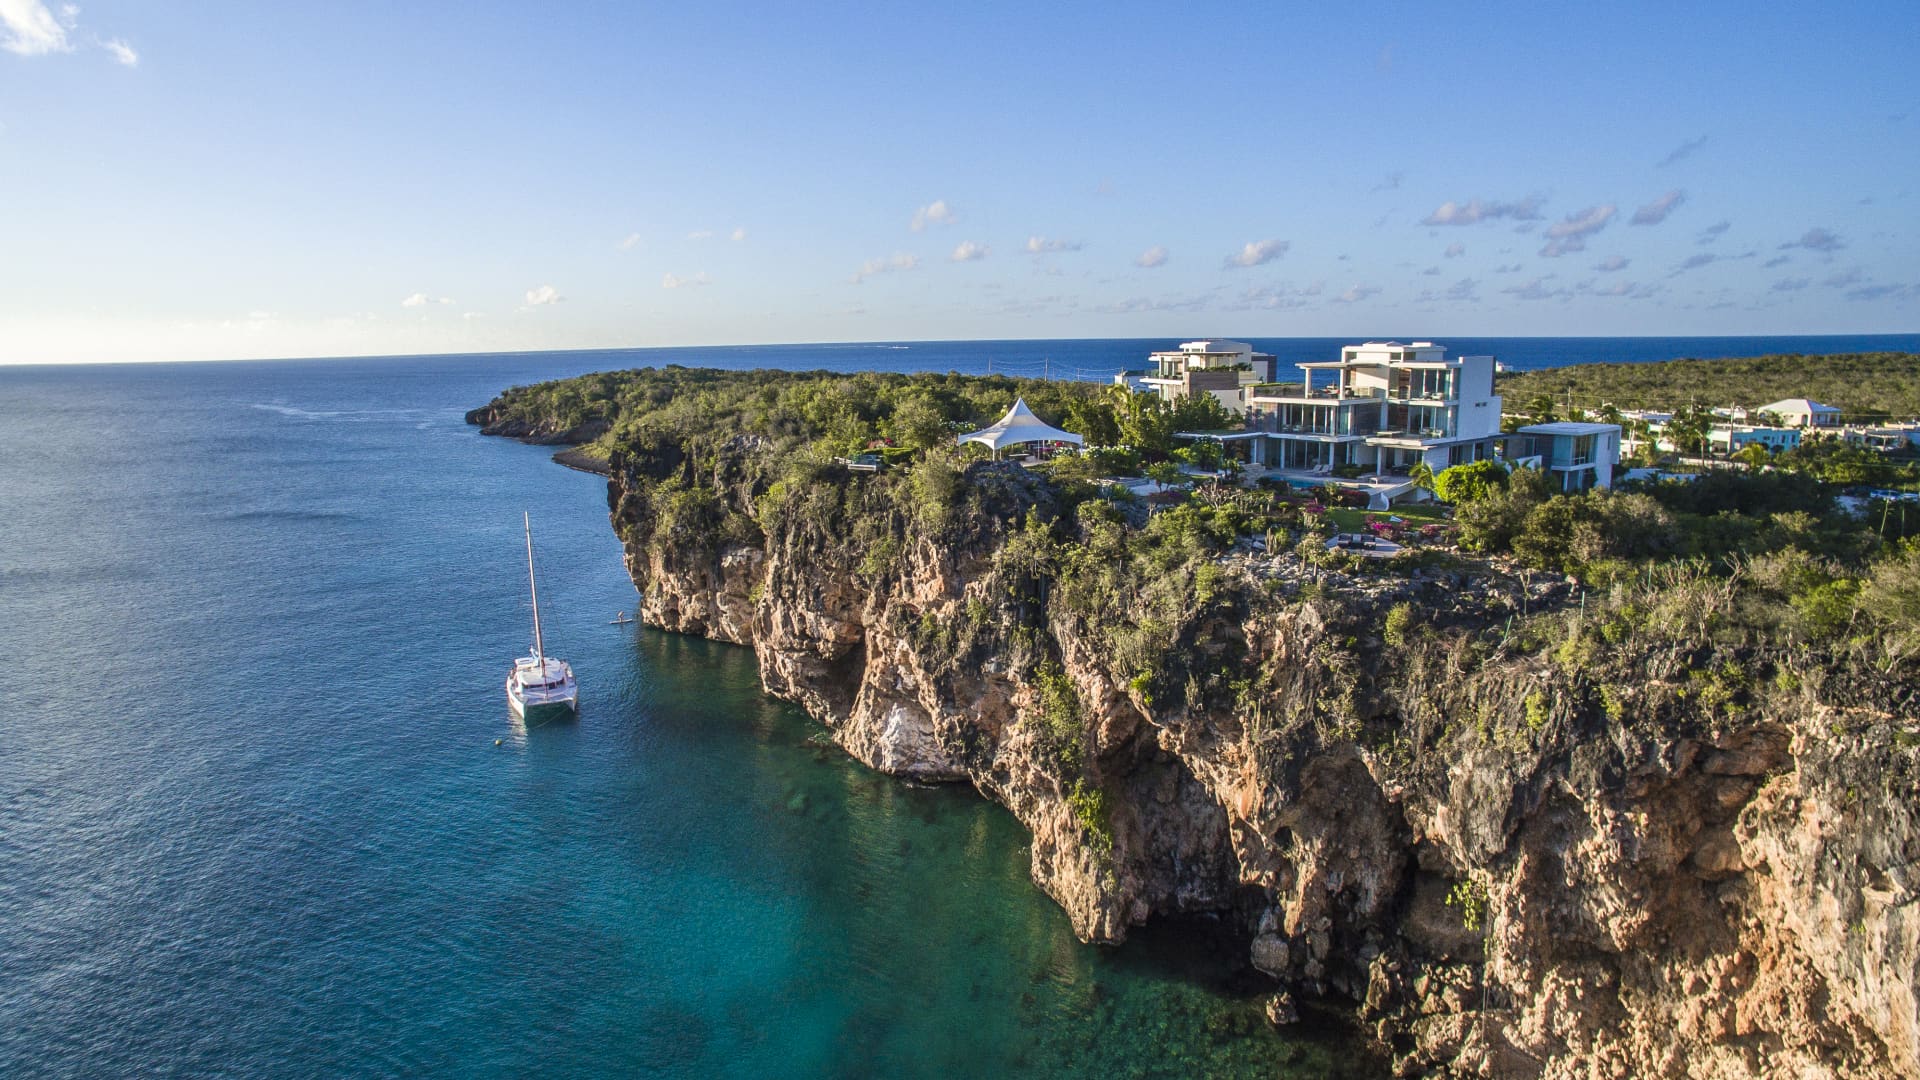 The 10-suite Ani Anguilla is open and accepting reservations.